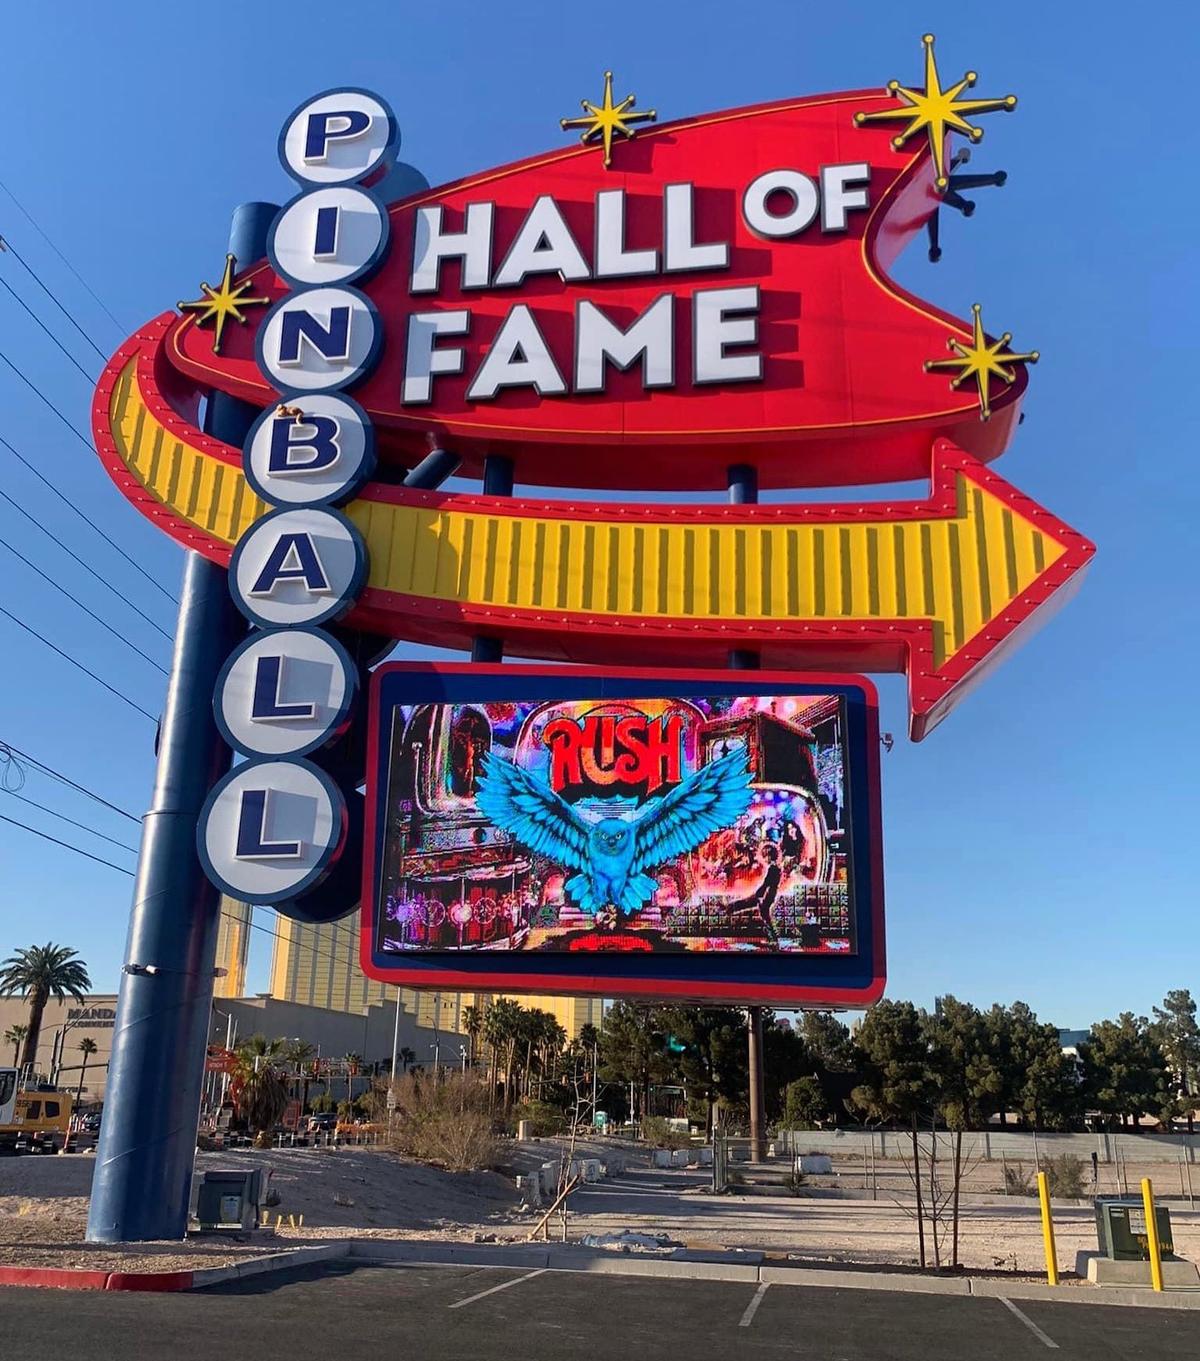 The Pinball Hall of Fame in Las Vegas features an astounding array of pinball and arcade games, all in perfect working order to provide hours of fun. (Courtesy of Pinball Hall of Fame)